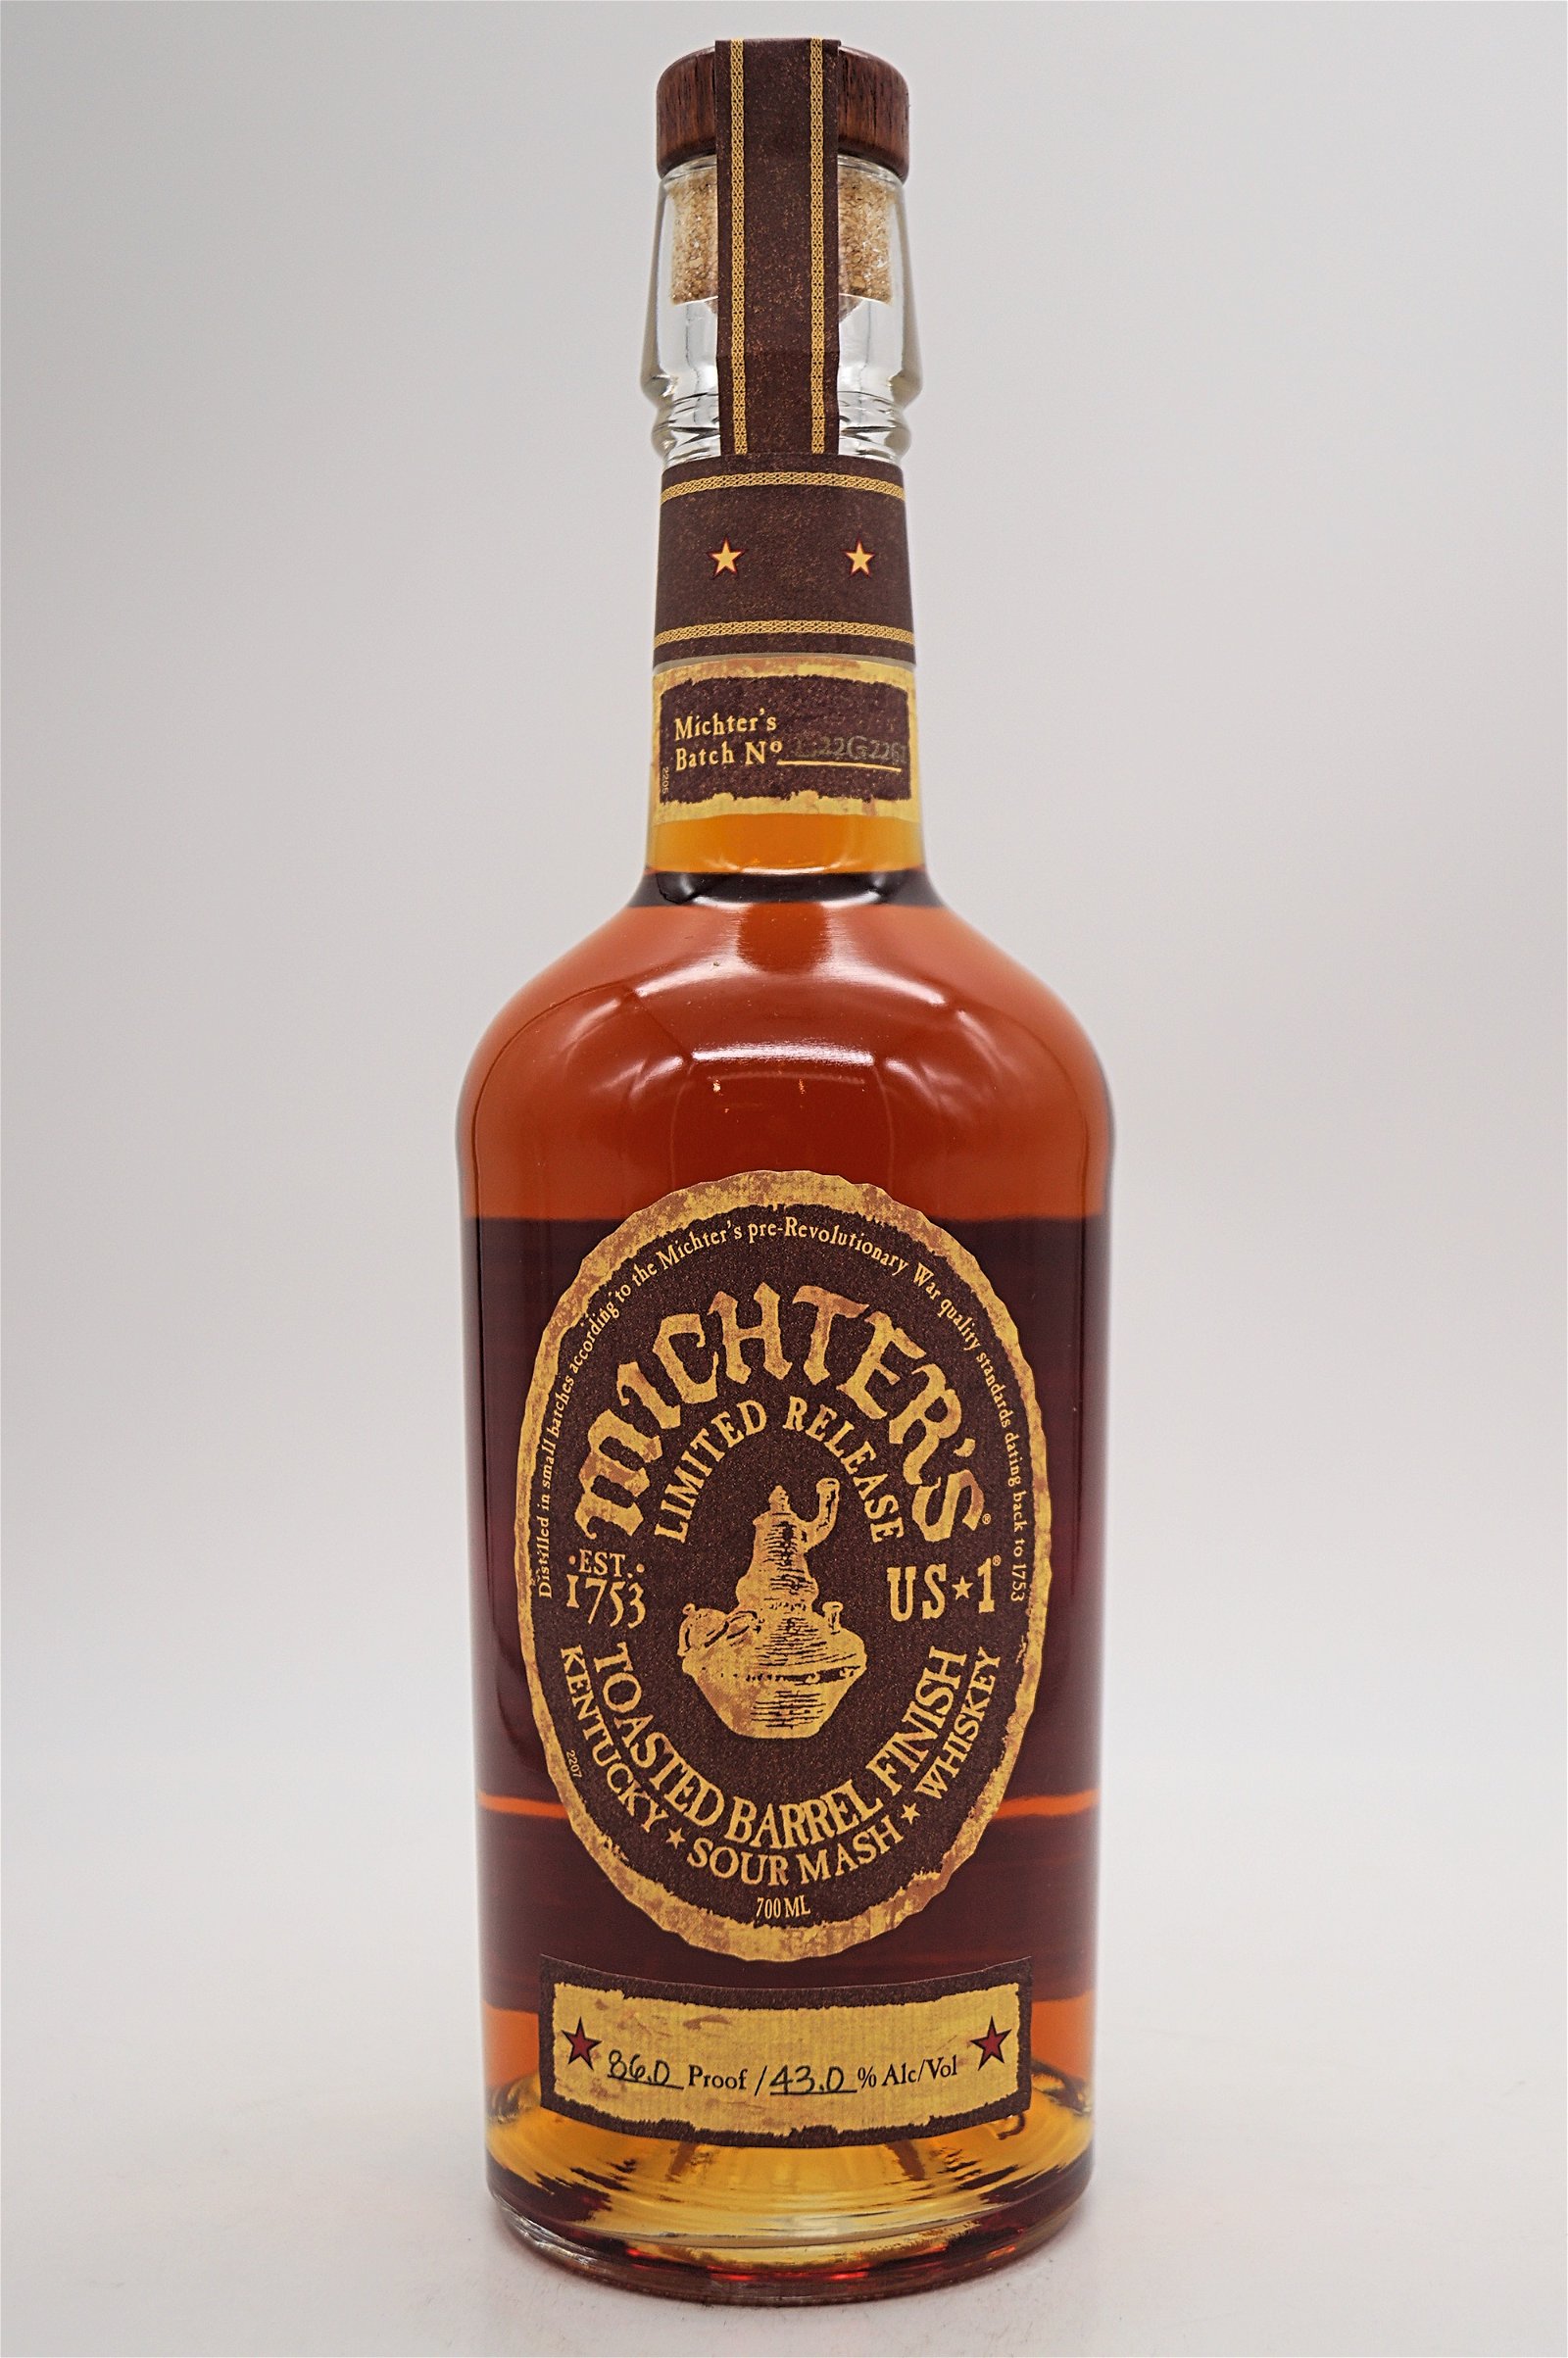 Michter's Toasted Barrel Fin Sour Mash Whiskey